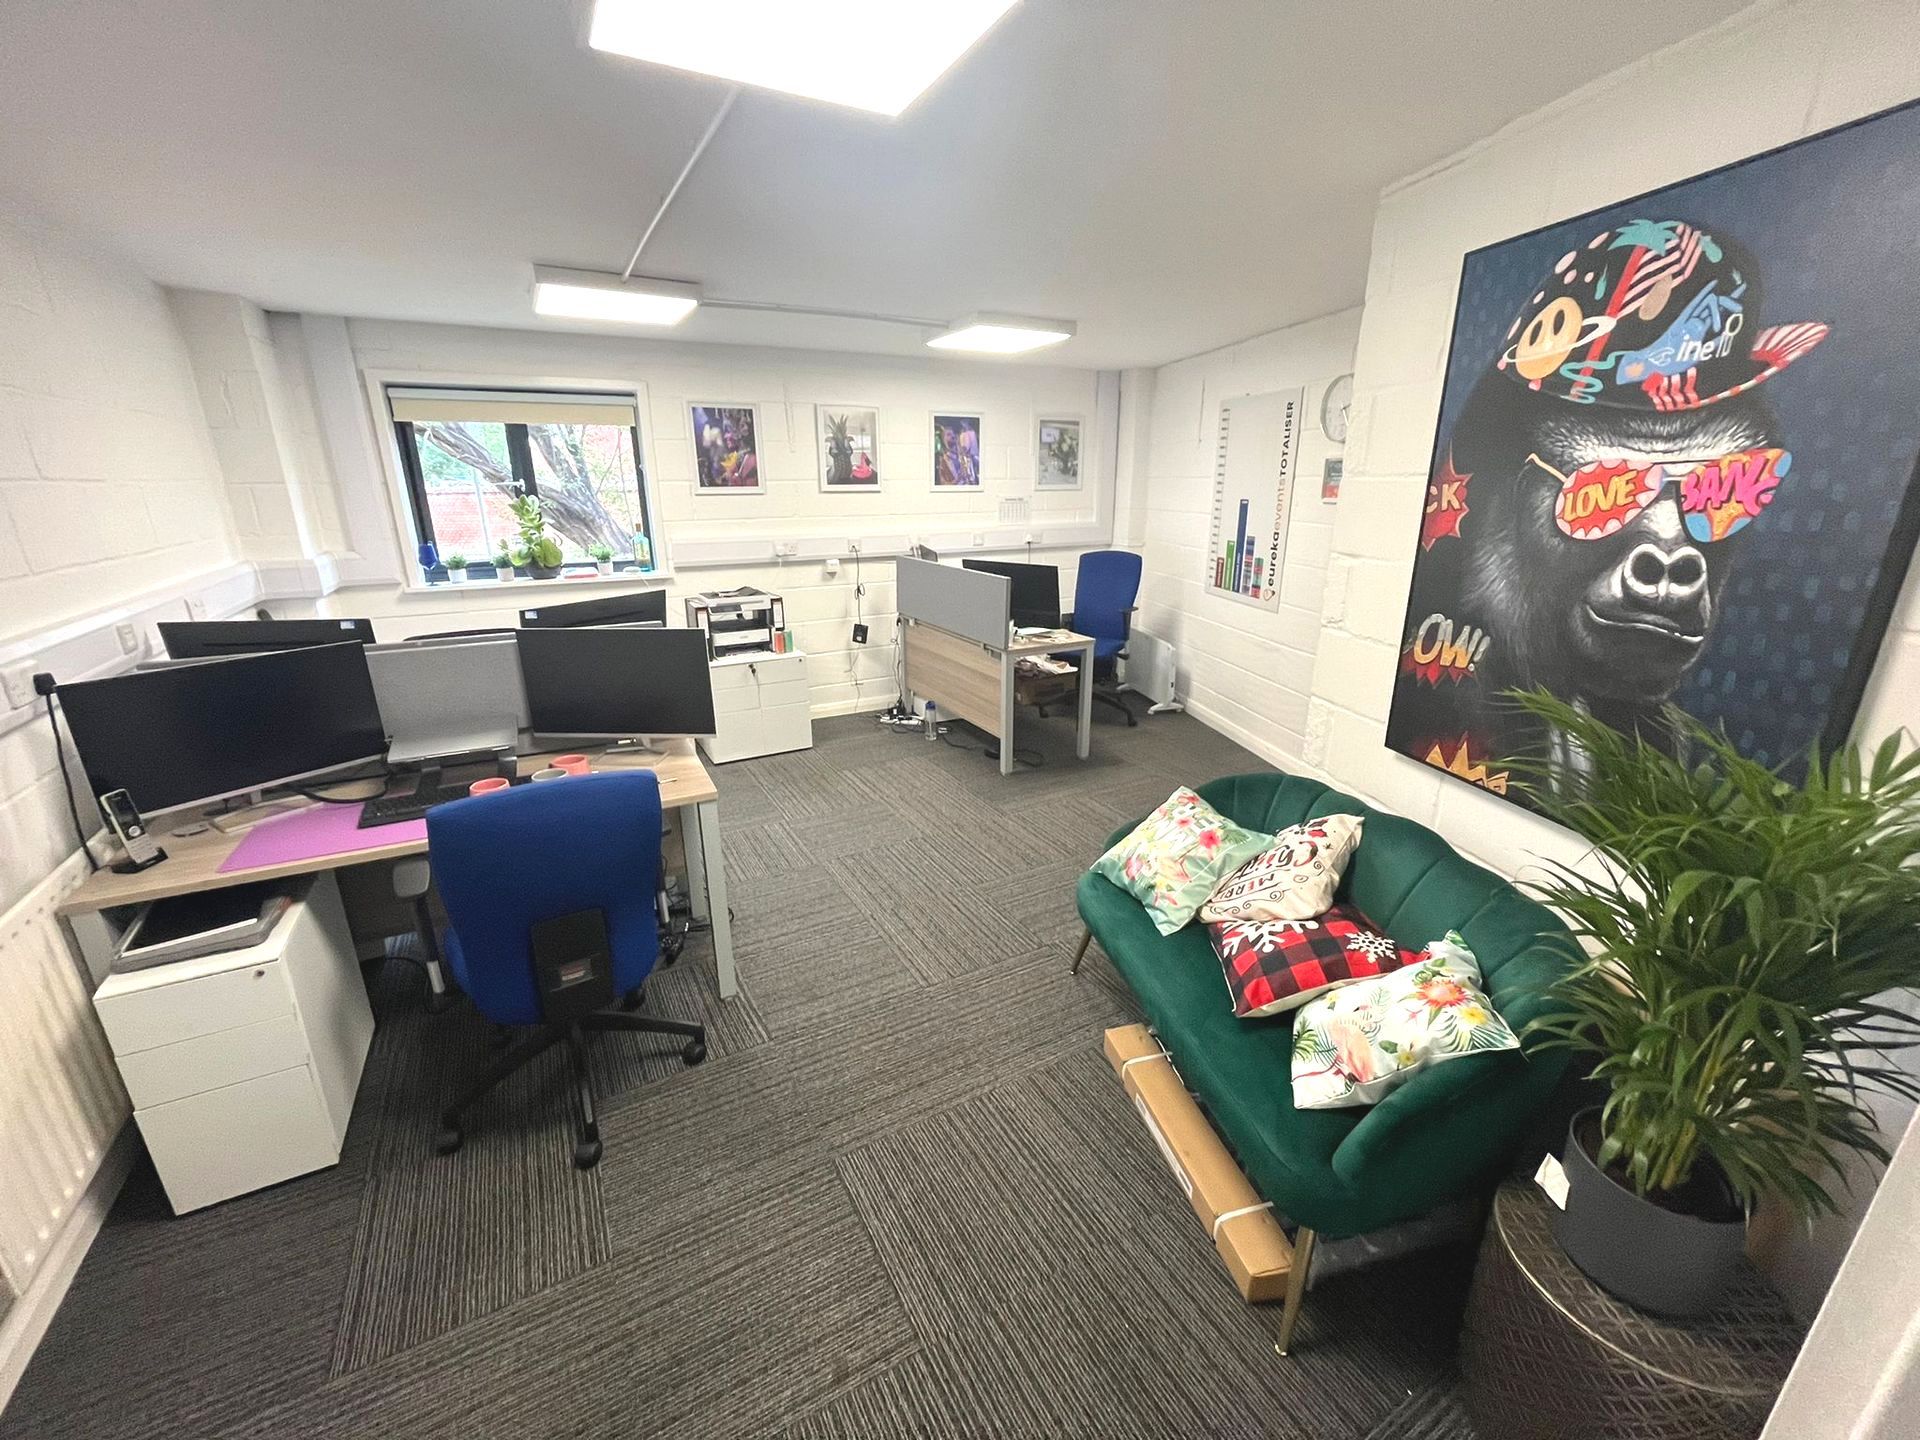 serviced office space options in Farnham